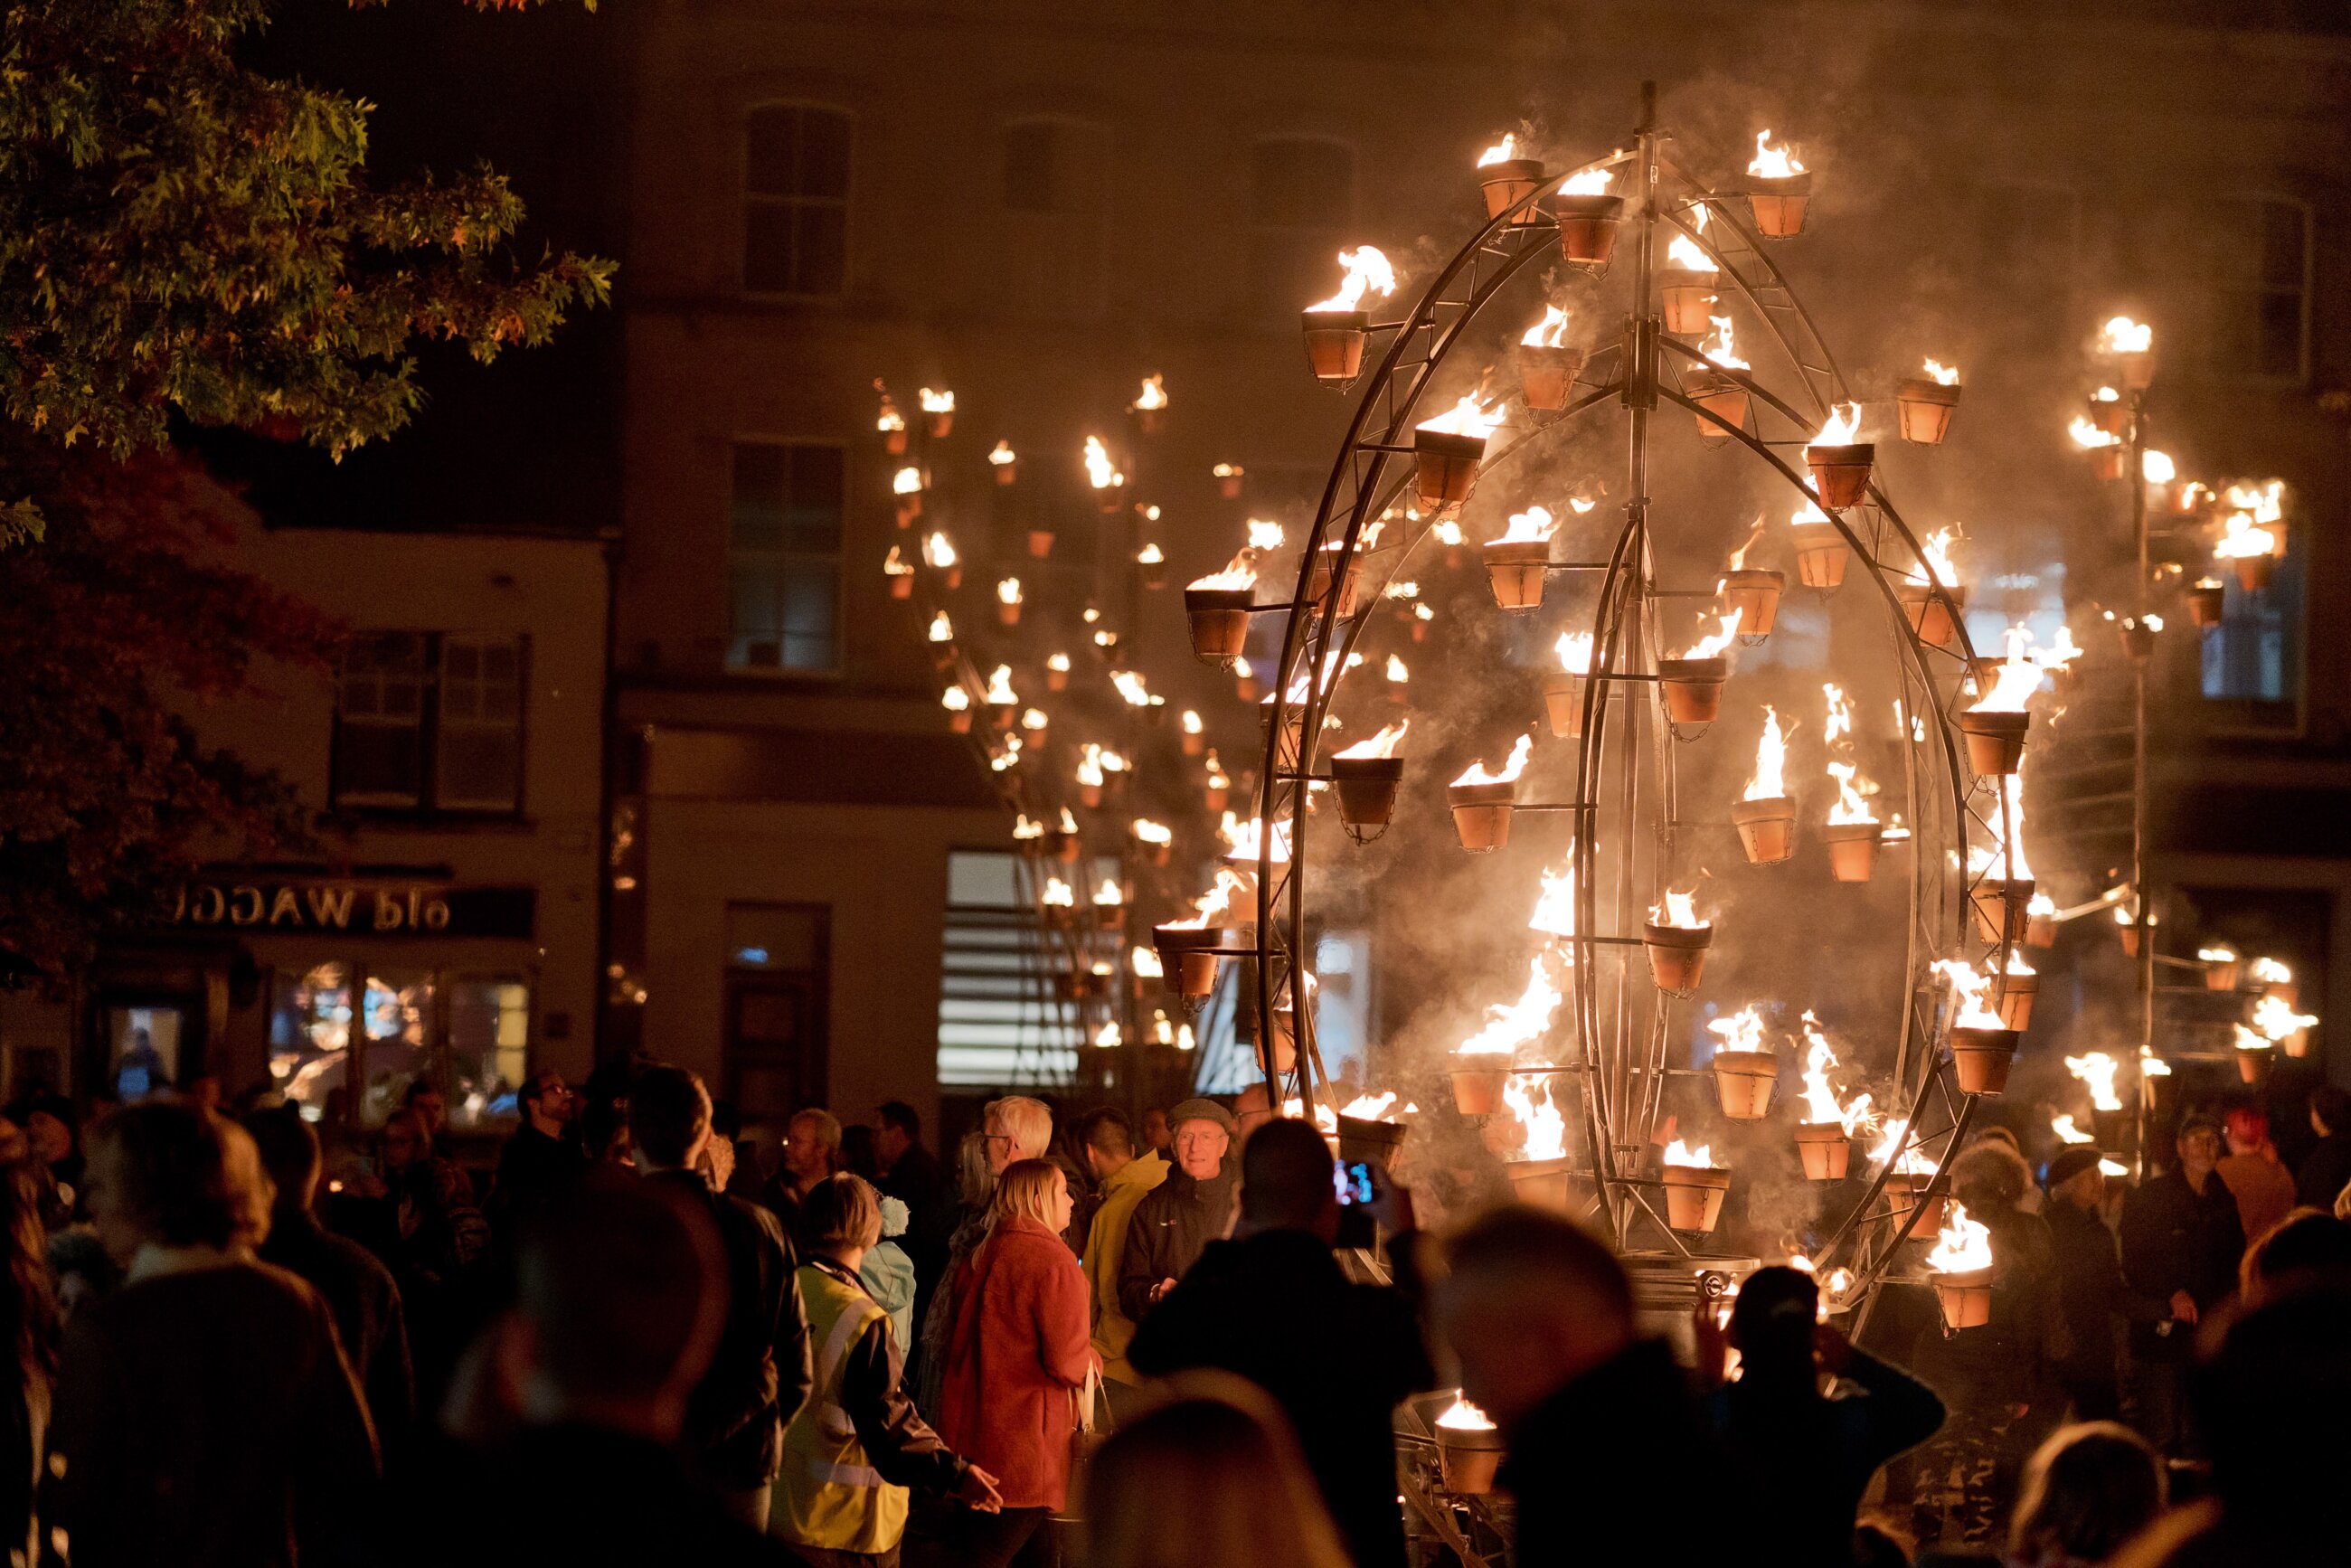 Image is of a public fire show hosted in Newbury market place. The image is at night time with an audience admiring a large metal framed wheel that has small ceramic plant pots placed around it. In each pot a small fire which lights up the circular framed structure.